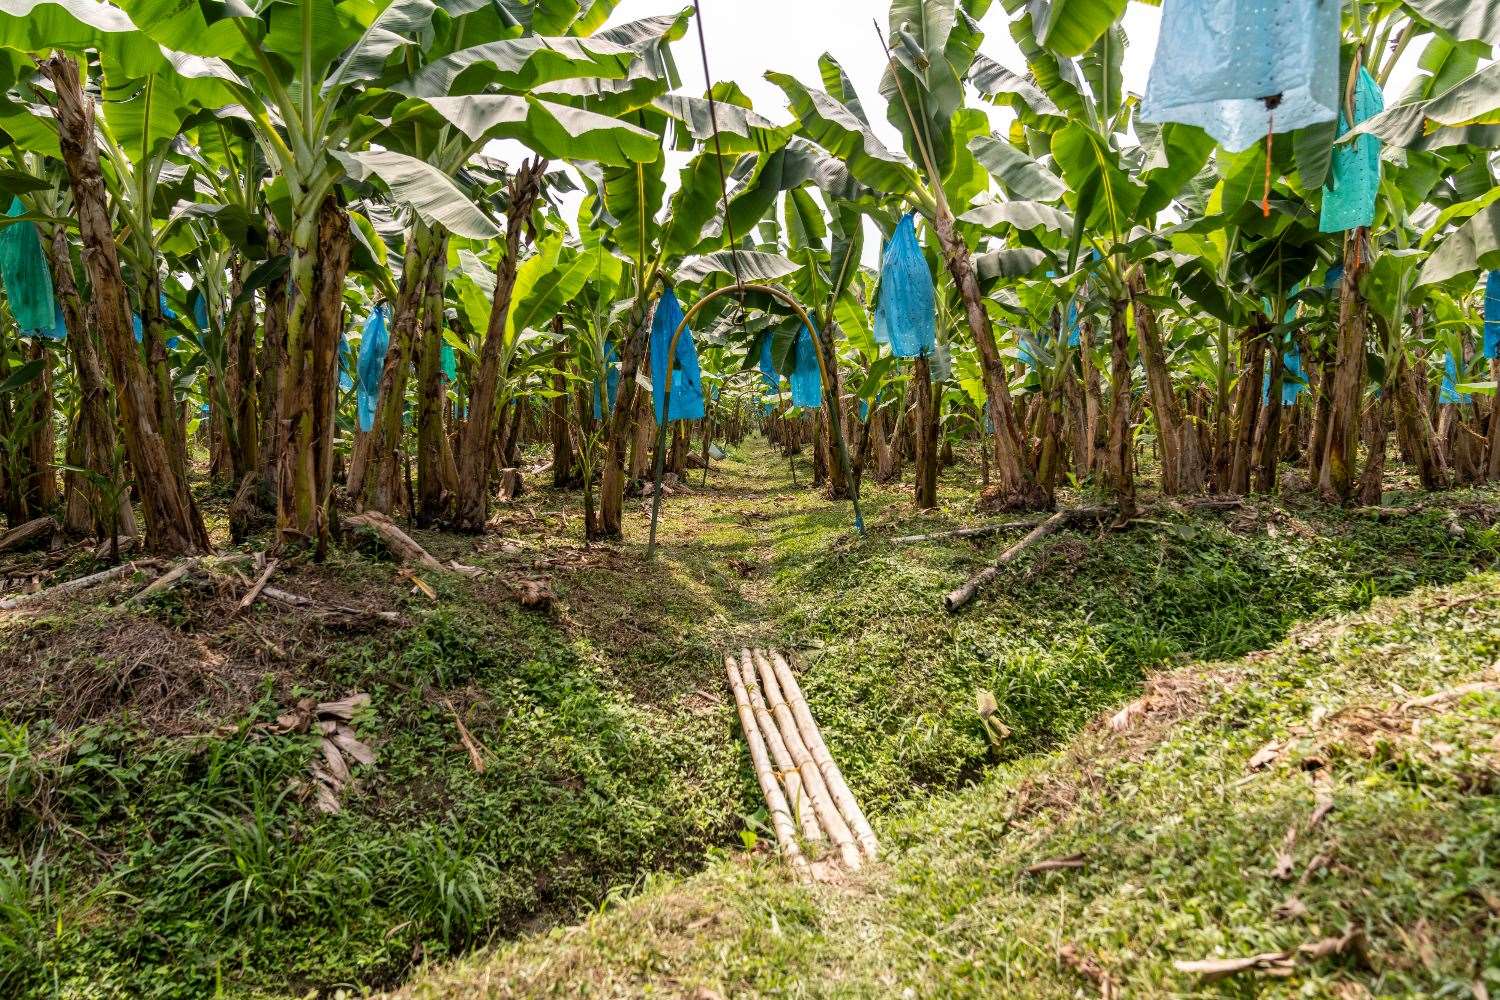 A banana farm in the Magdalena region of Colombia (Chris Terry/Fairtrade/PA)